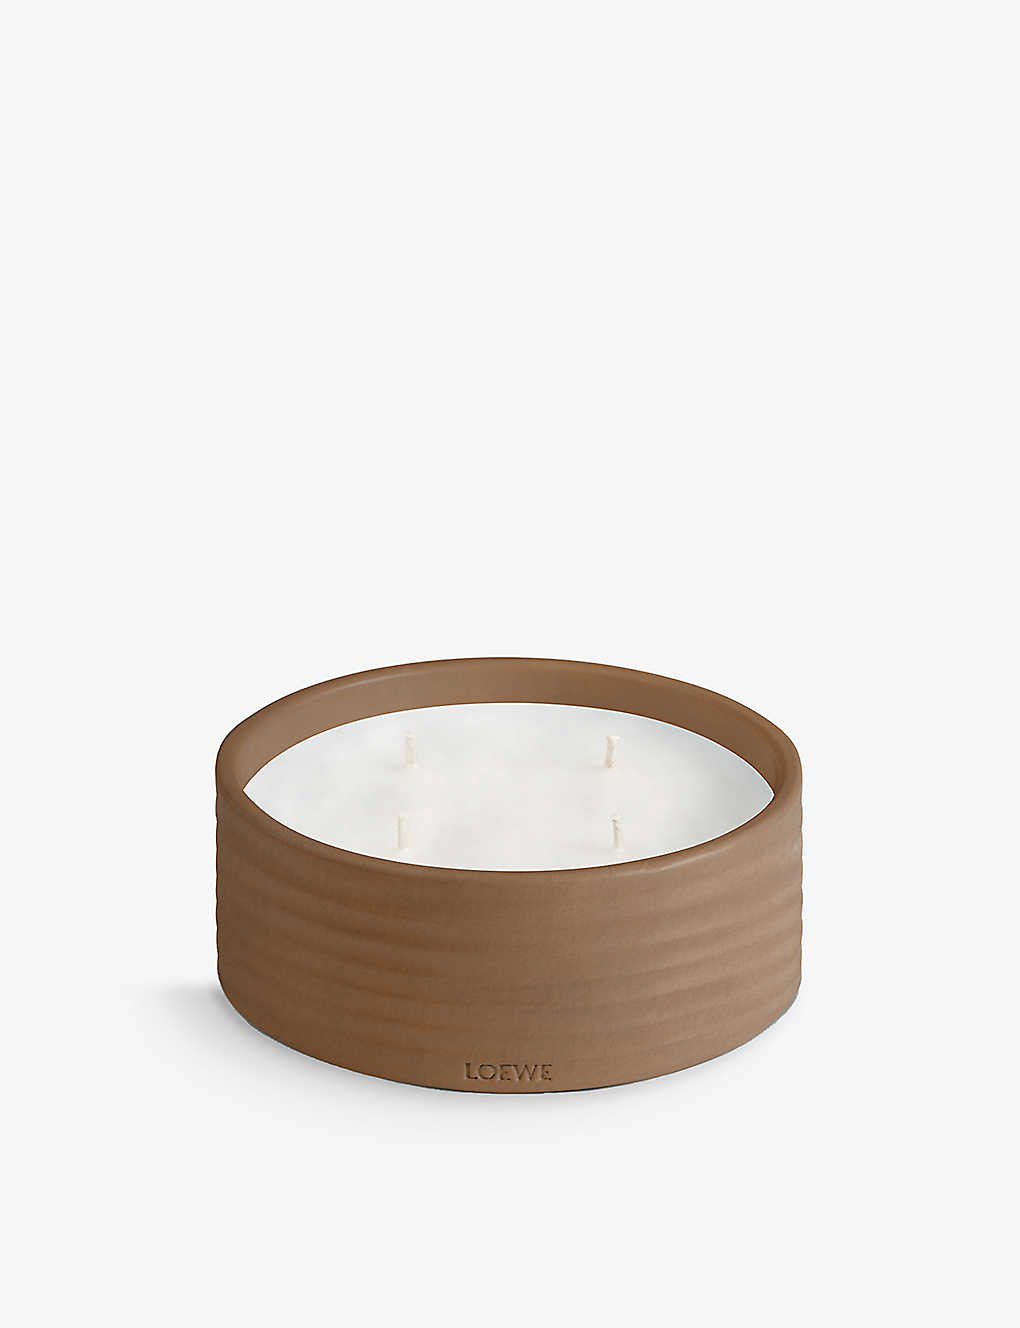 Loewe Thyme Outdoor Scented Candle 750g